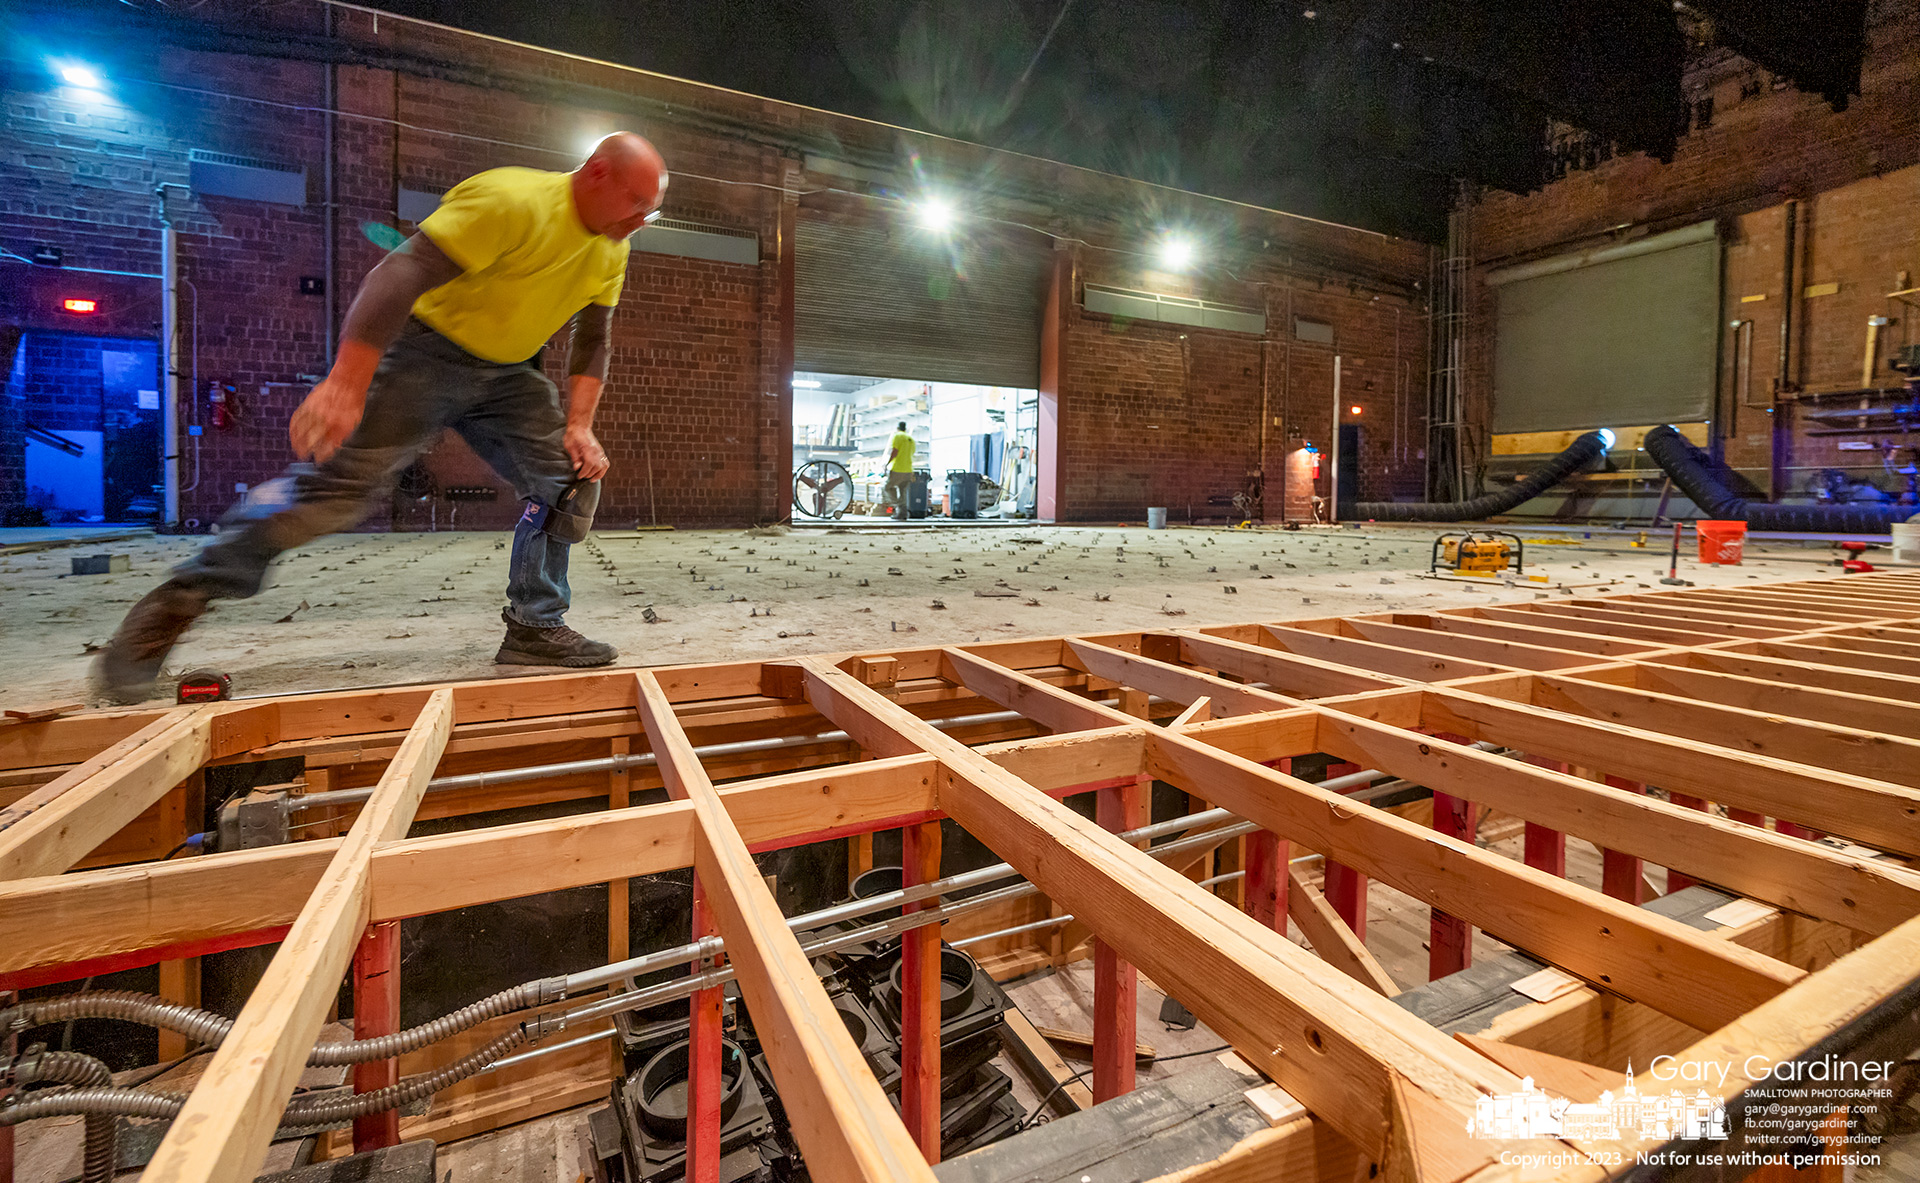 A carpenter strides across the stage in Cowan Hall at Otterbein University measuring sections before beginning to replace the entire floor after a broken water pipe flooded the stage several weeks ago. My Final Photo for February 22, 2023.